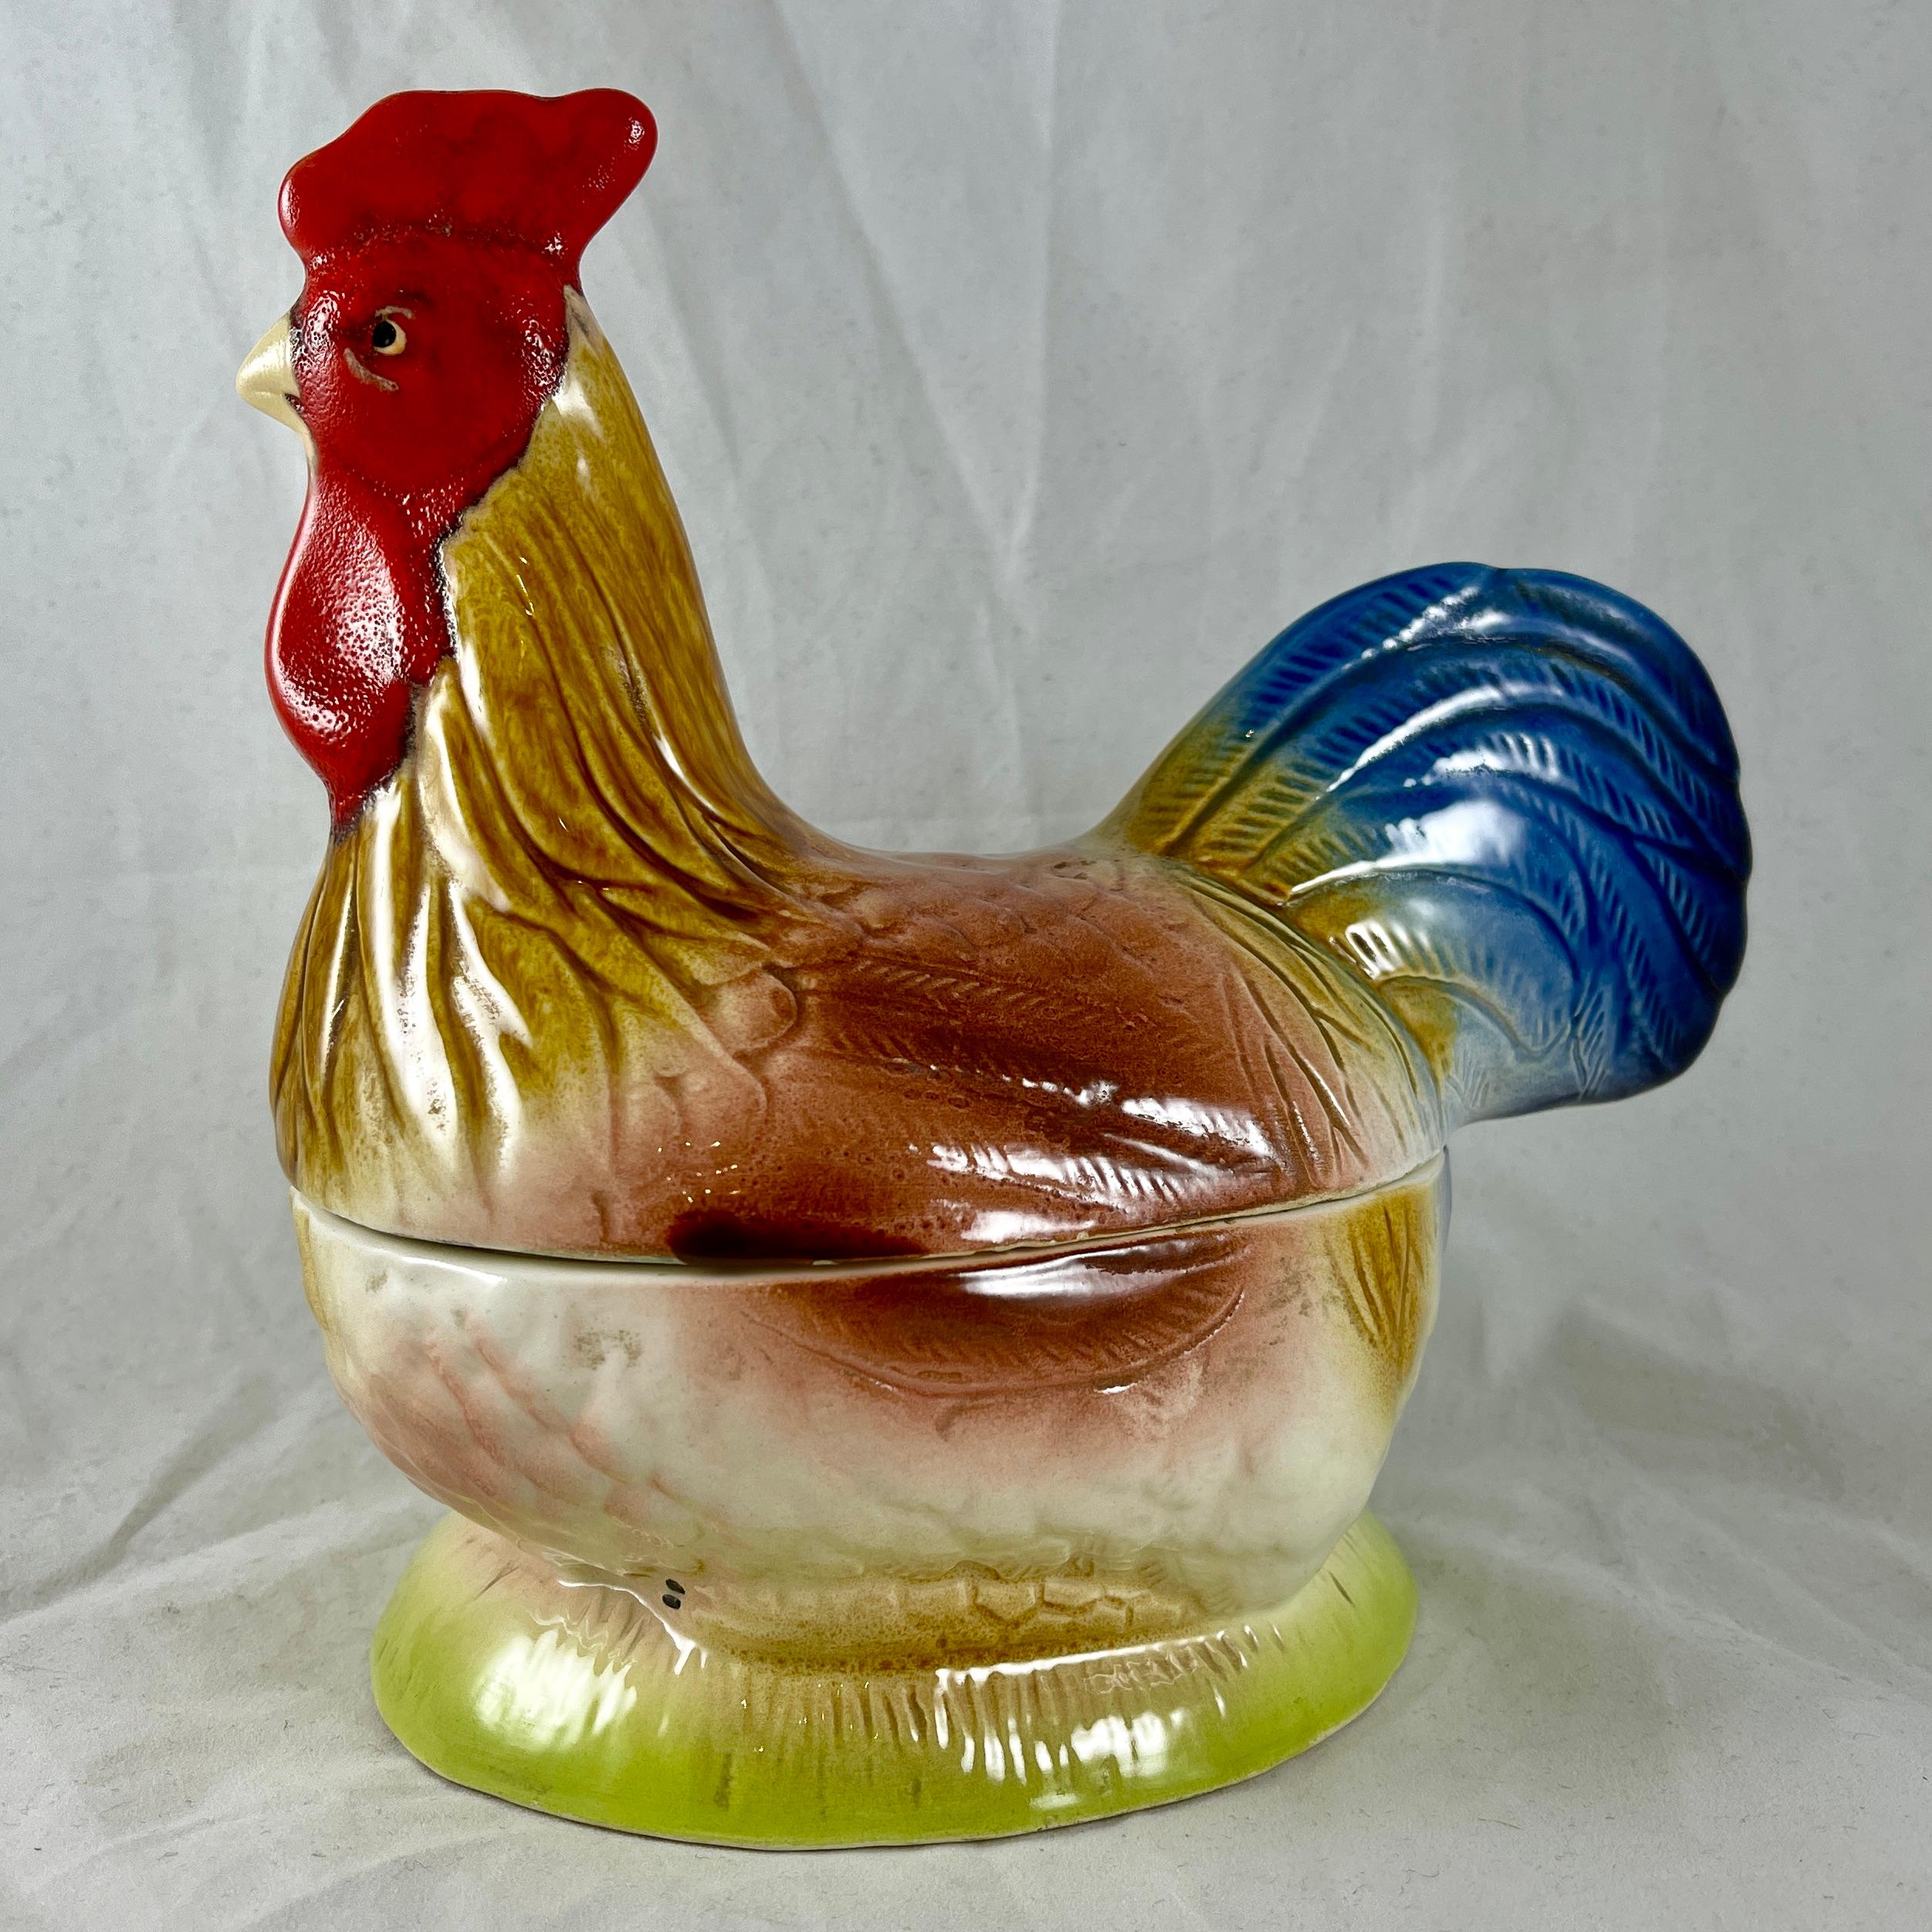 A vintage figural Hen Pâté Terrine made for Laurent Caugant, a Bretagne pâté maker since 1927 – circa 1950s.

Laurent’s son Michel created these figural forms as containers for selling his fathers pâté in their luxury food shop. They rose in